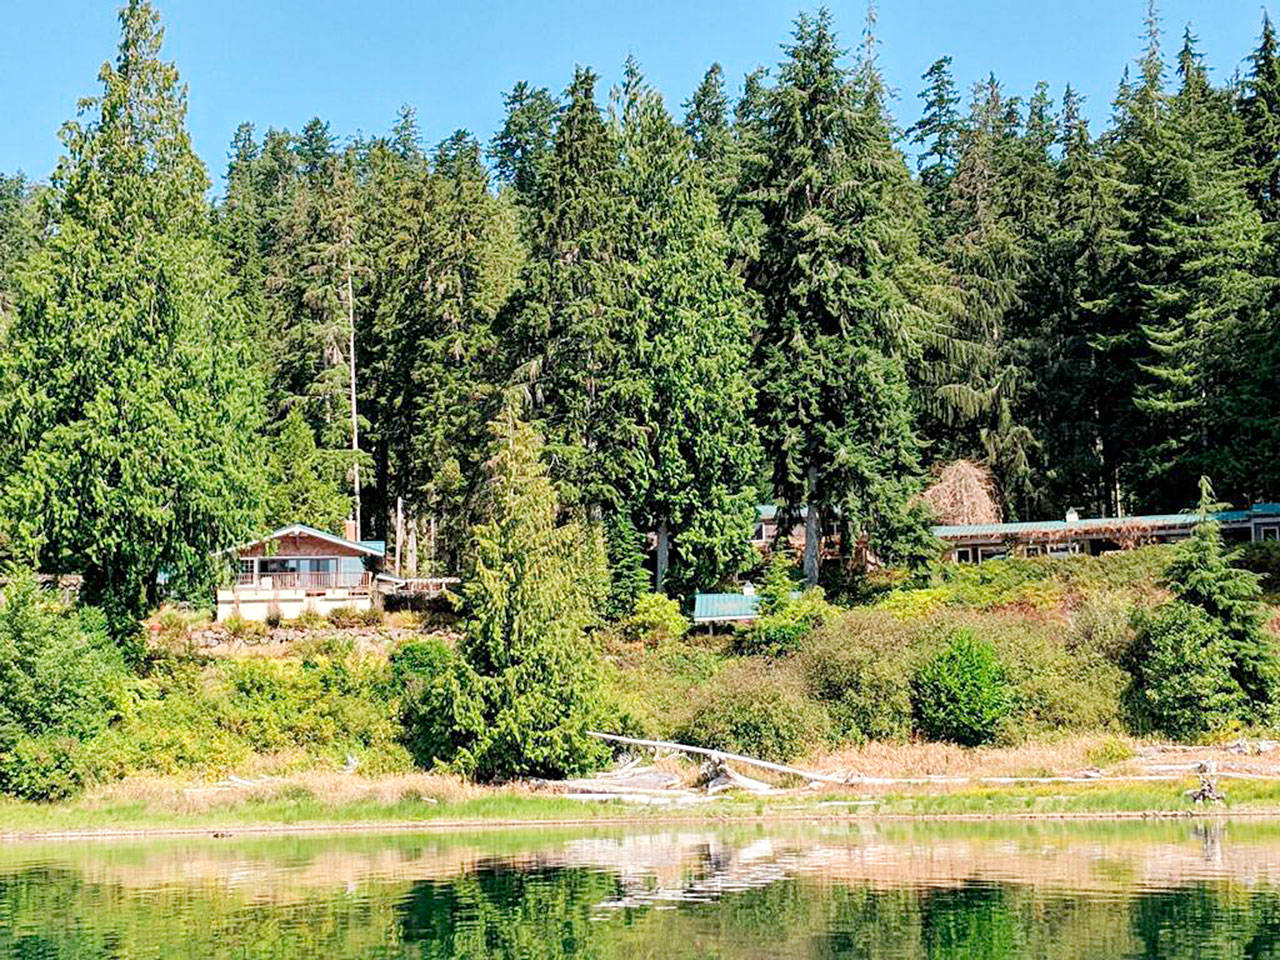 The National Park Service has begun the final steps to demolish the now-shuttered North Shore Resort on Lake Quinault on the lake’s North Shore Road.